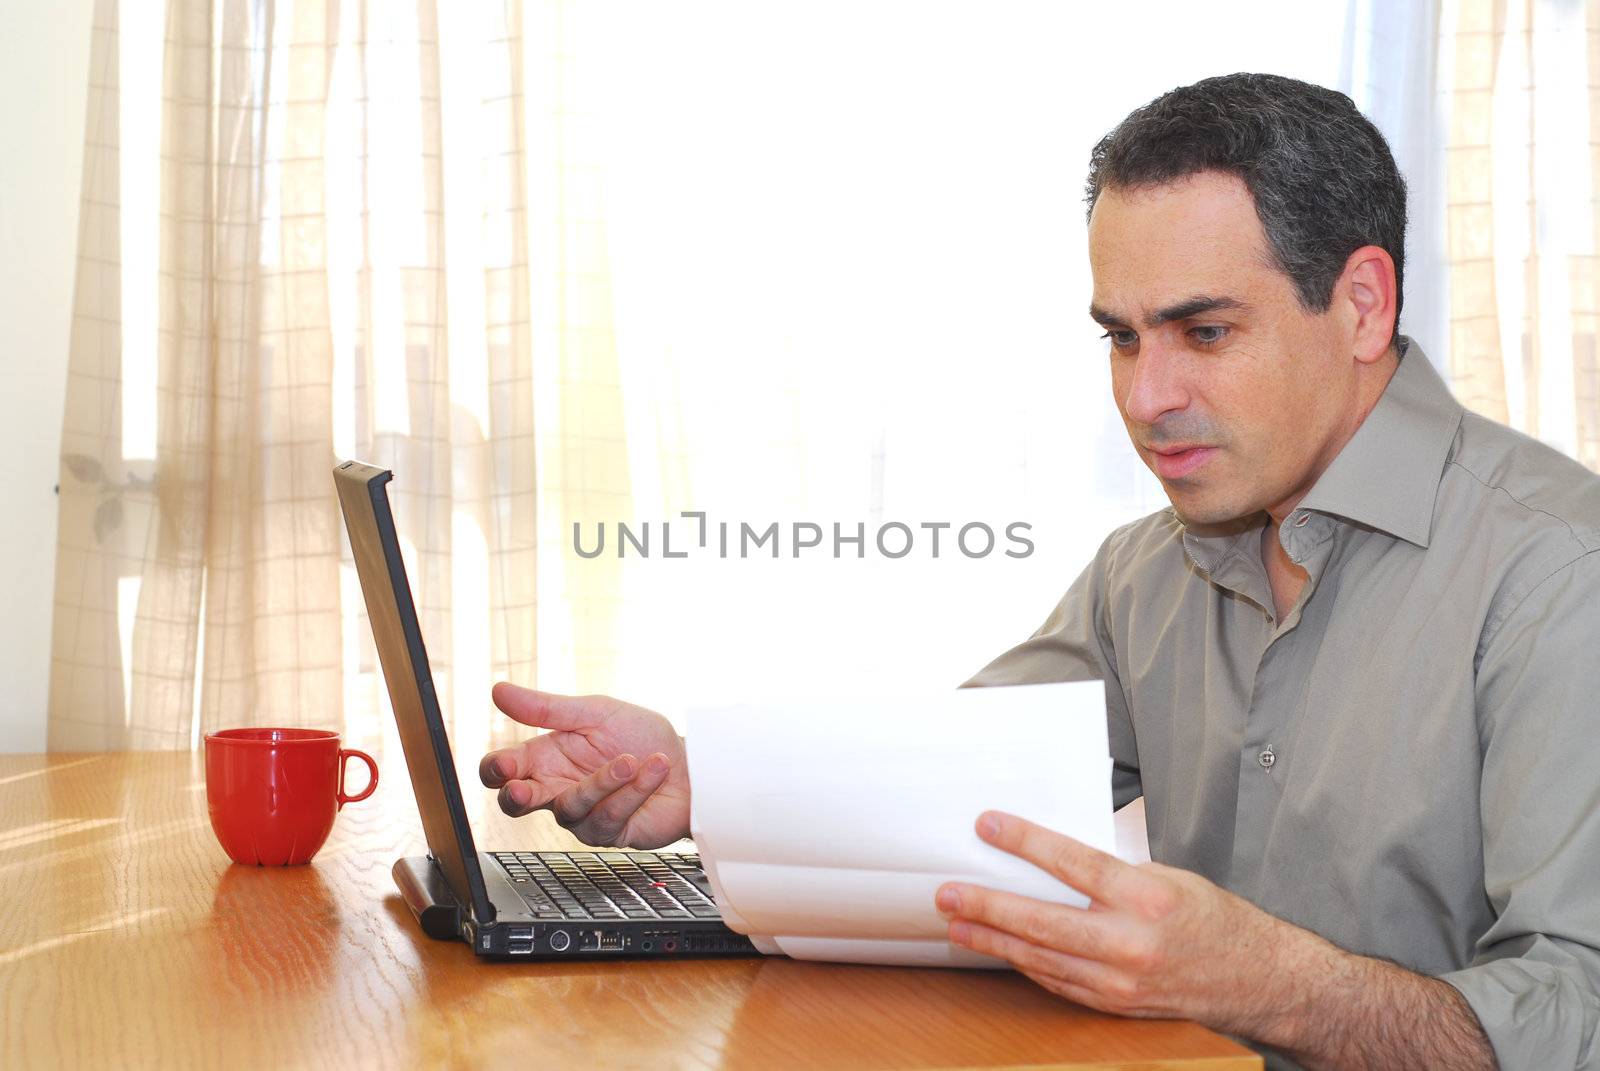 Man sitting at his desk with a laptop looking at bills